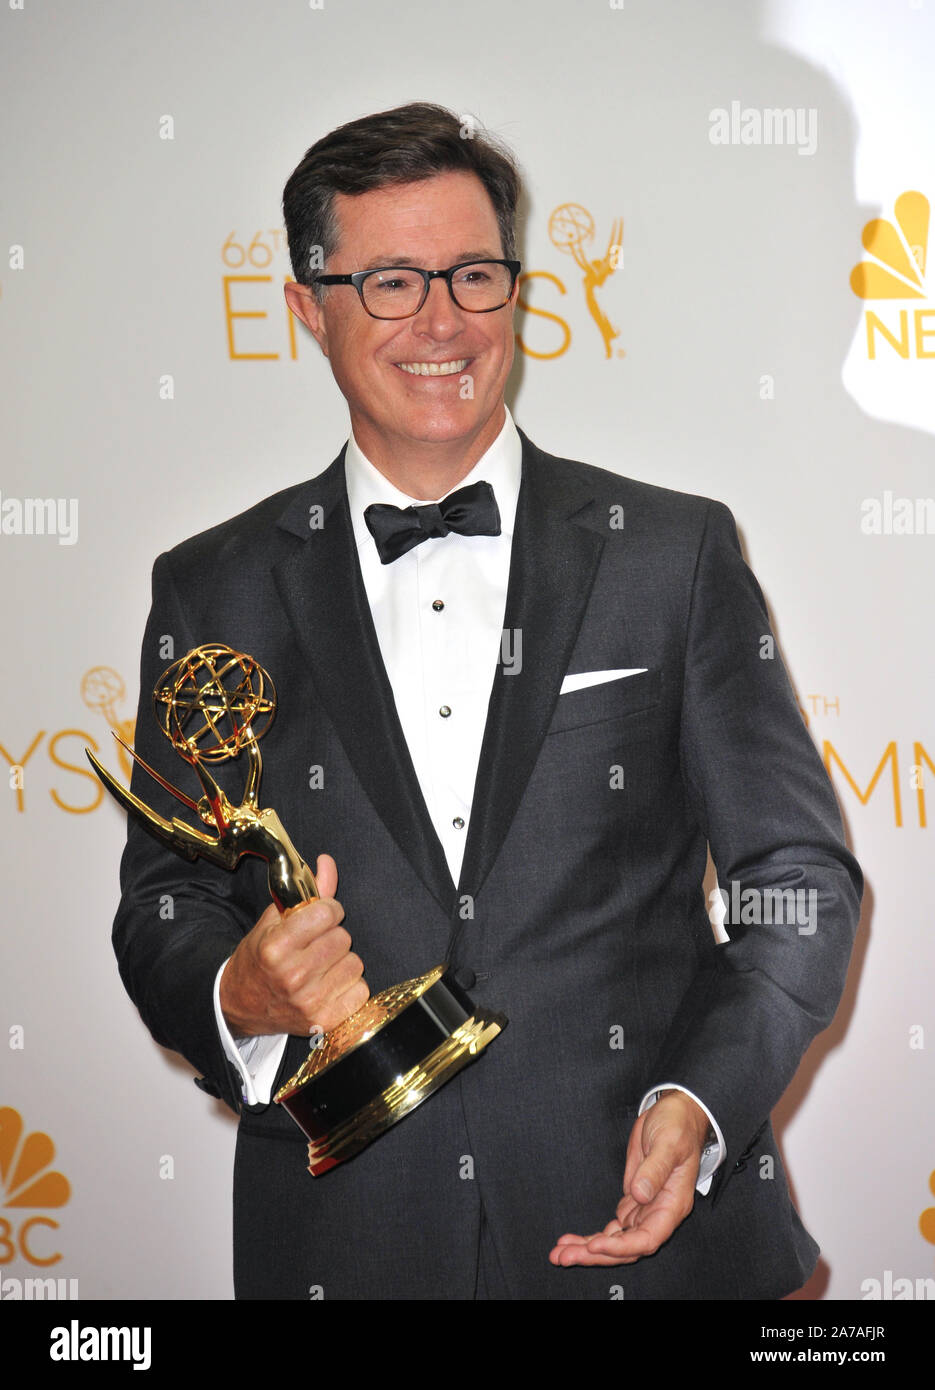 LOS ANGELES, CA - AUGUST 25, 2014: Stephen Colbert at the 66th Primetime Emmy Awards at the Nokia Theatre L.A. Live downtown Los Angeles.© 2014 Paul Smith / Featureflash Stock Photo